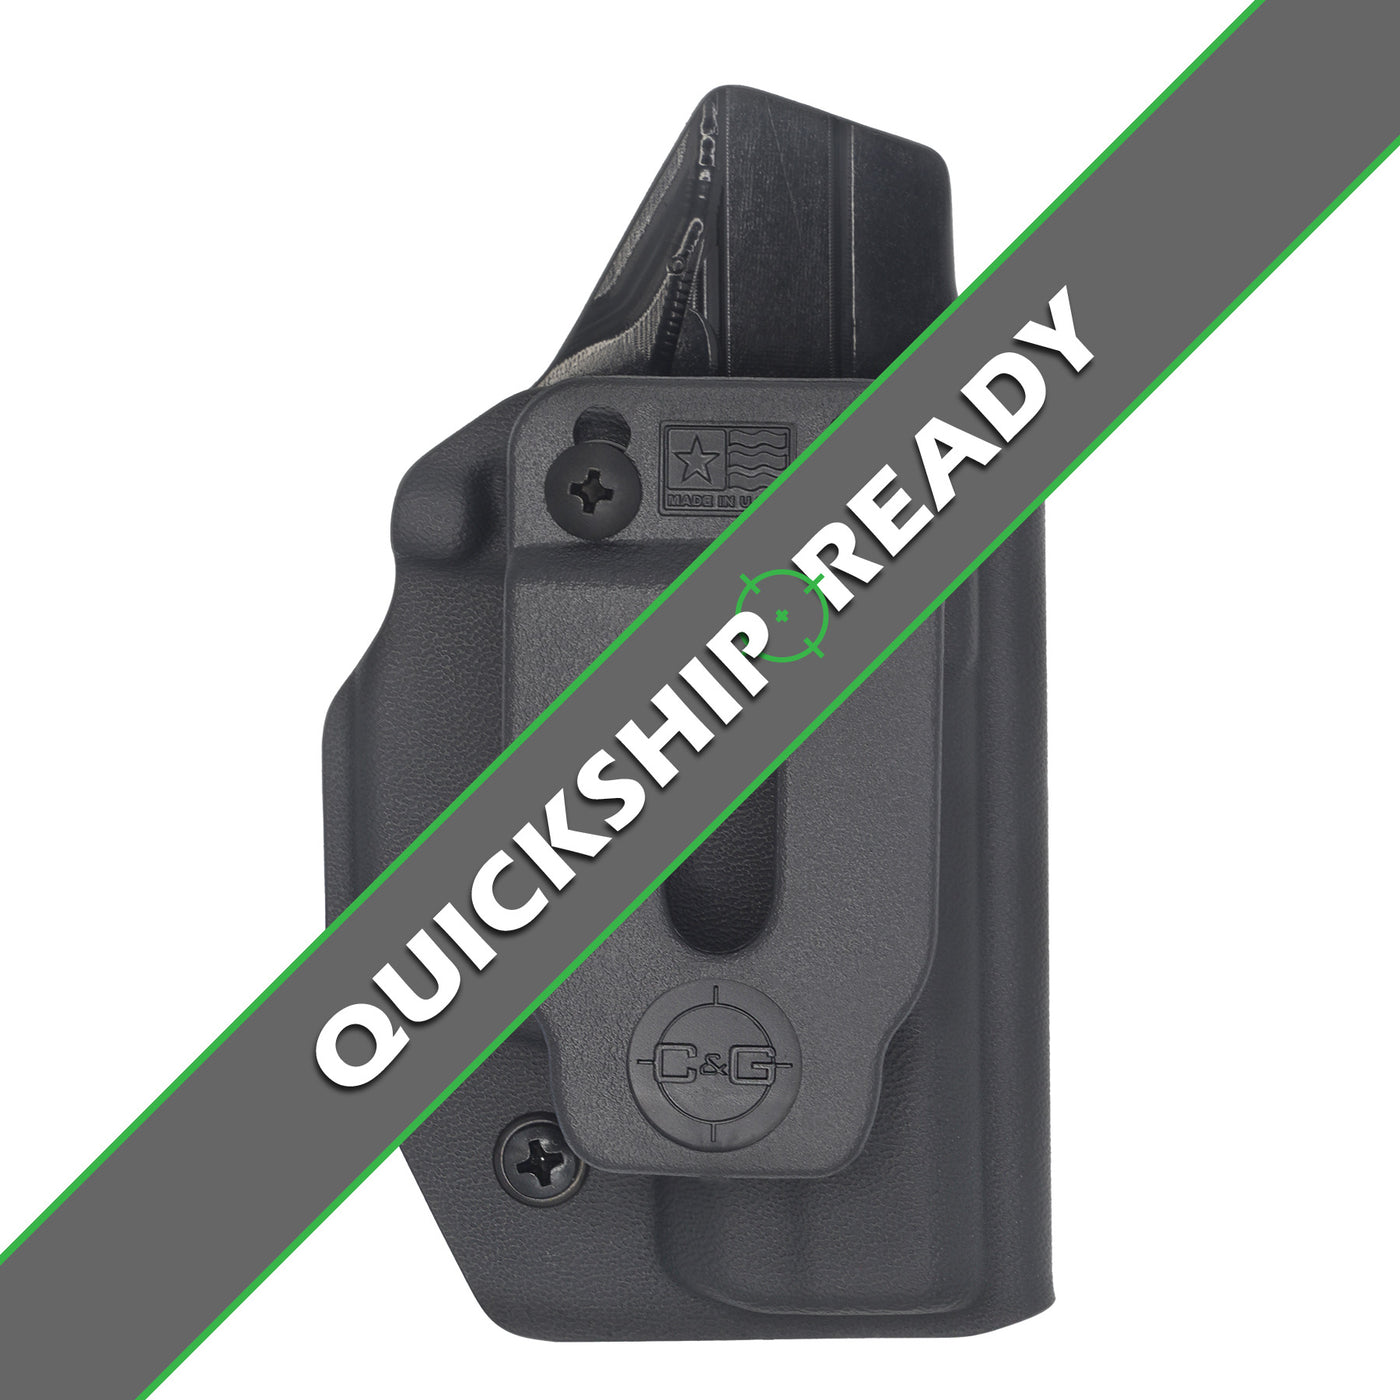 C&G Holsters quick ship Covert IWB kydex holster for LCPII